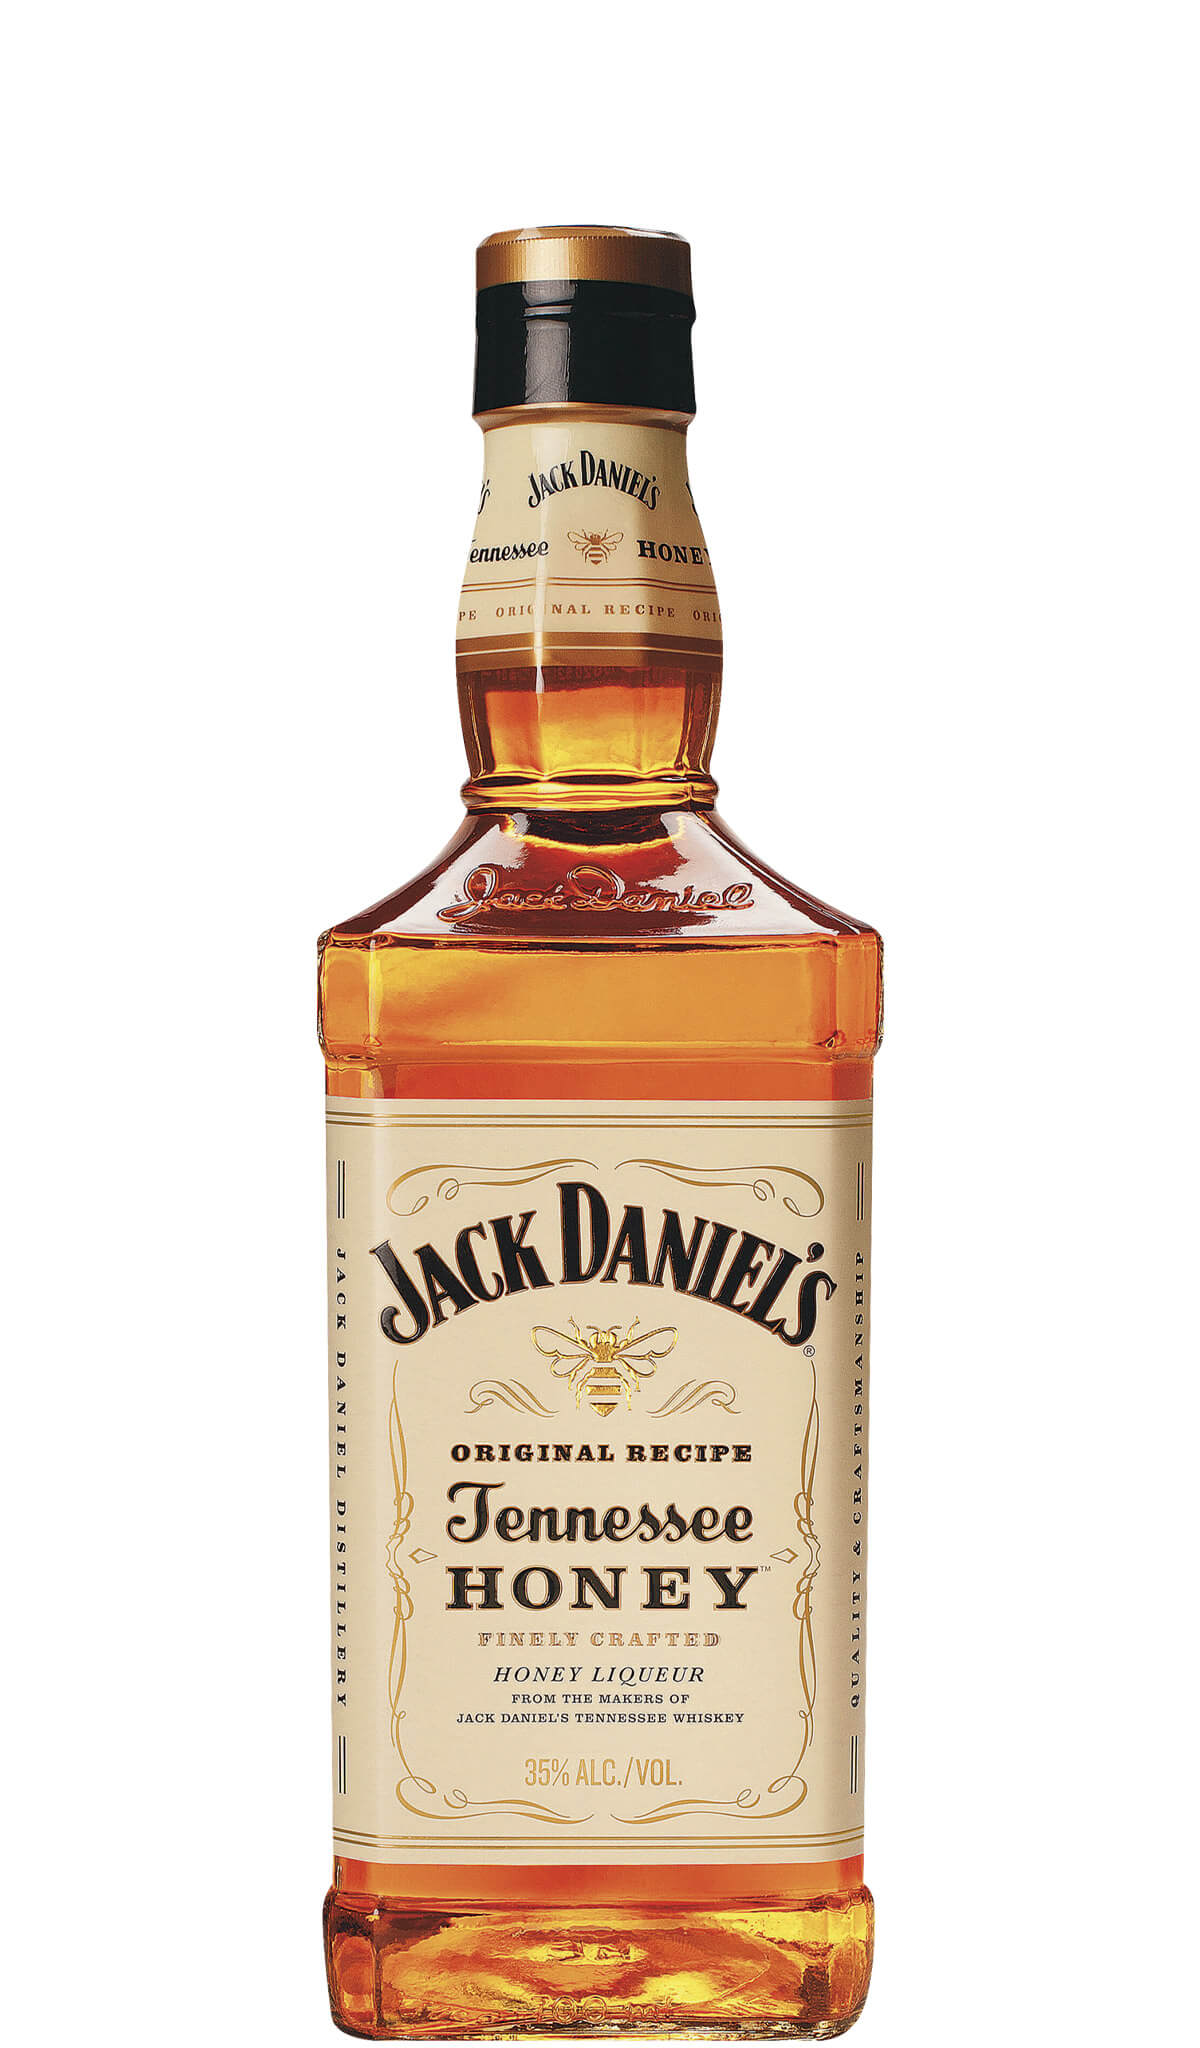 Find out more, explore the range and buy Jack Daniel’s Tennessee Honey Whiskey 700mL available online at Wine Sellers Direct - Australia's independent liquor specialists.